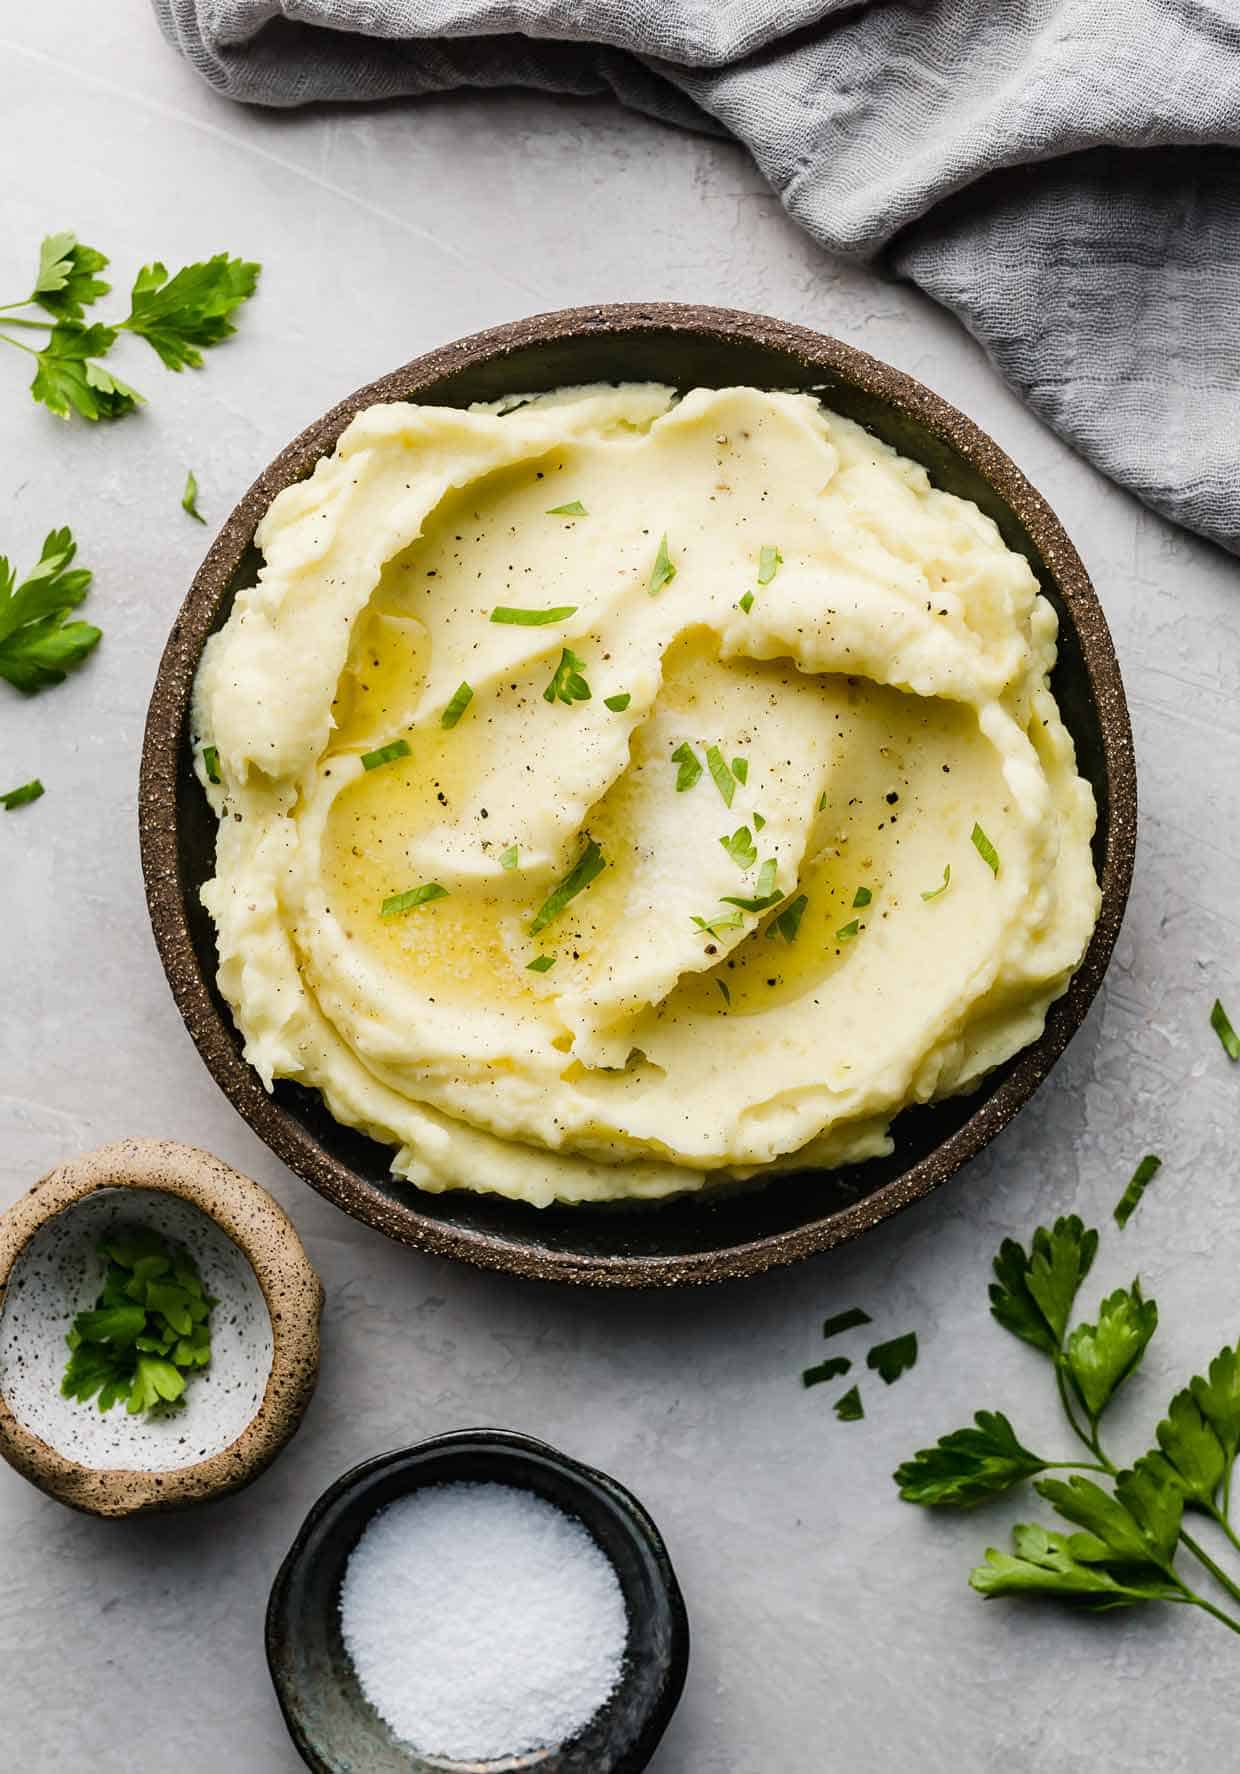 Swirled homemade mashed potatoes on a black plate topped with fresh chopped parsley.